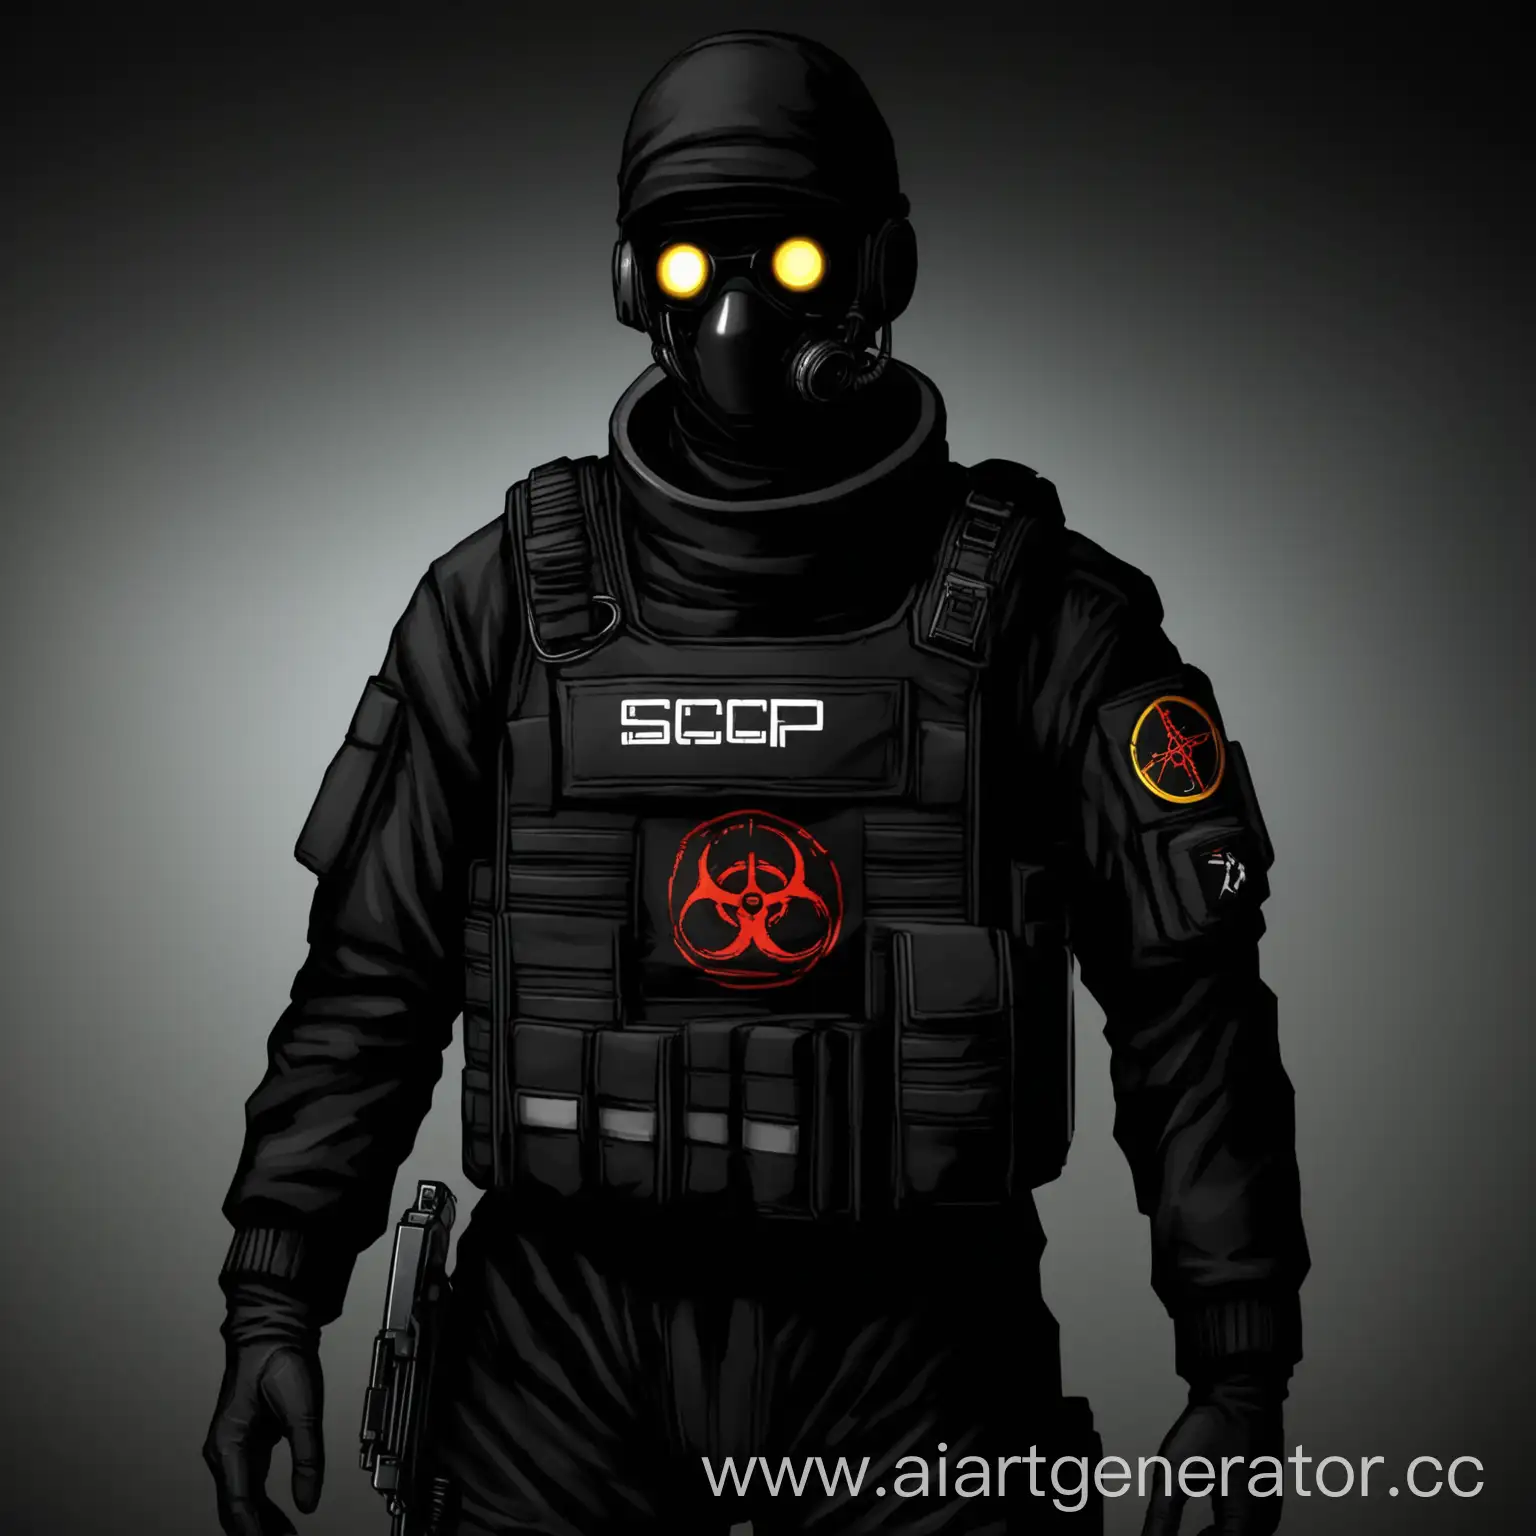 SCP-Project-Command-Operative-in-Black-Uniform-with-Patch